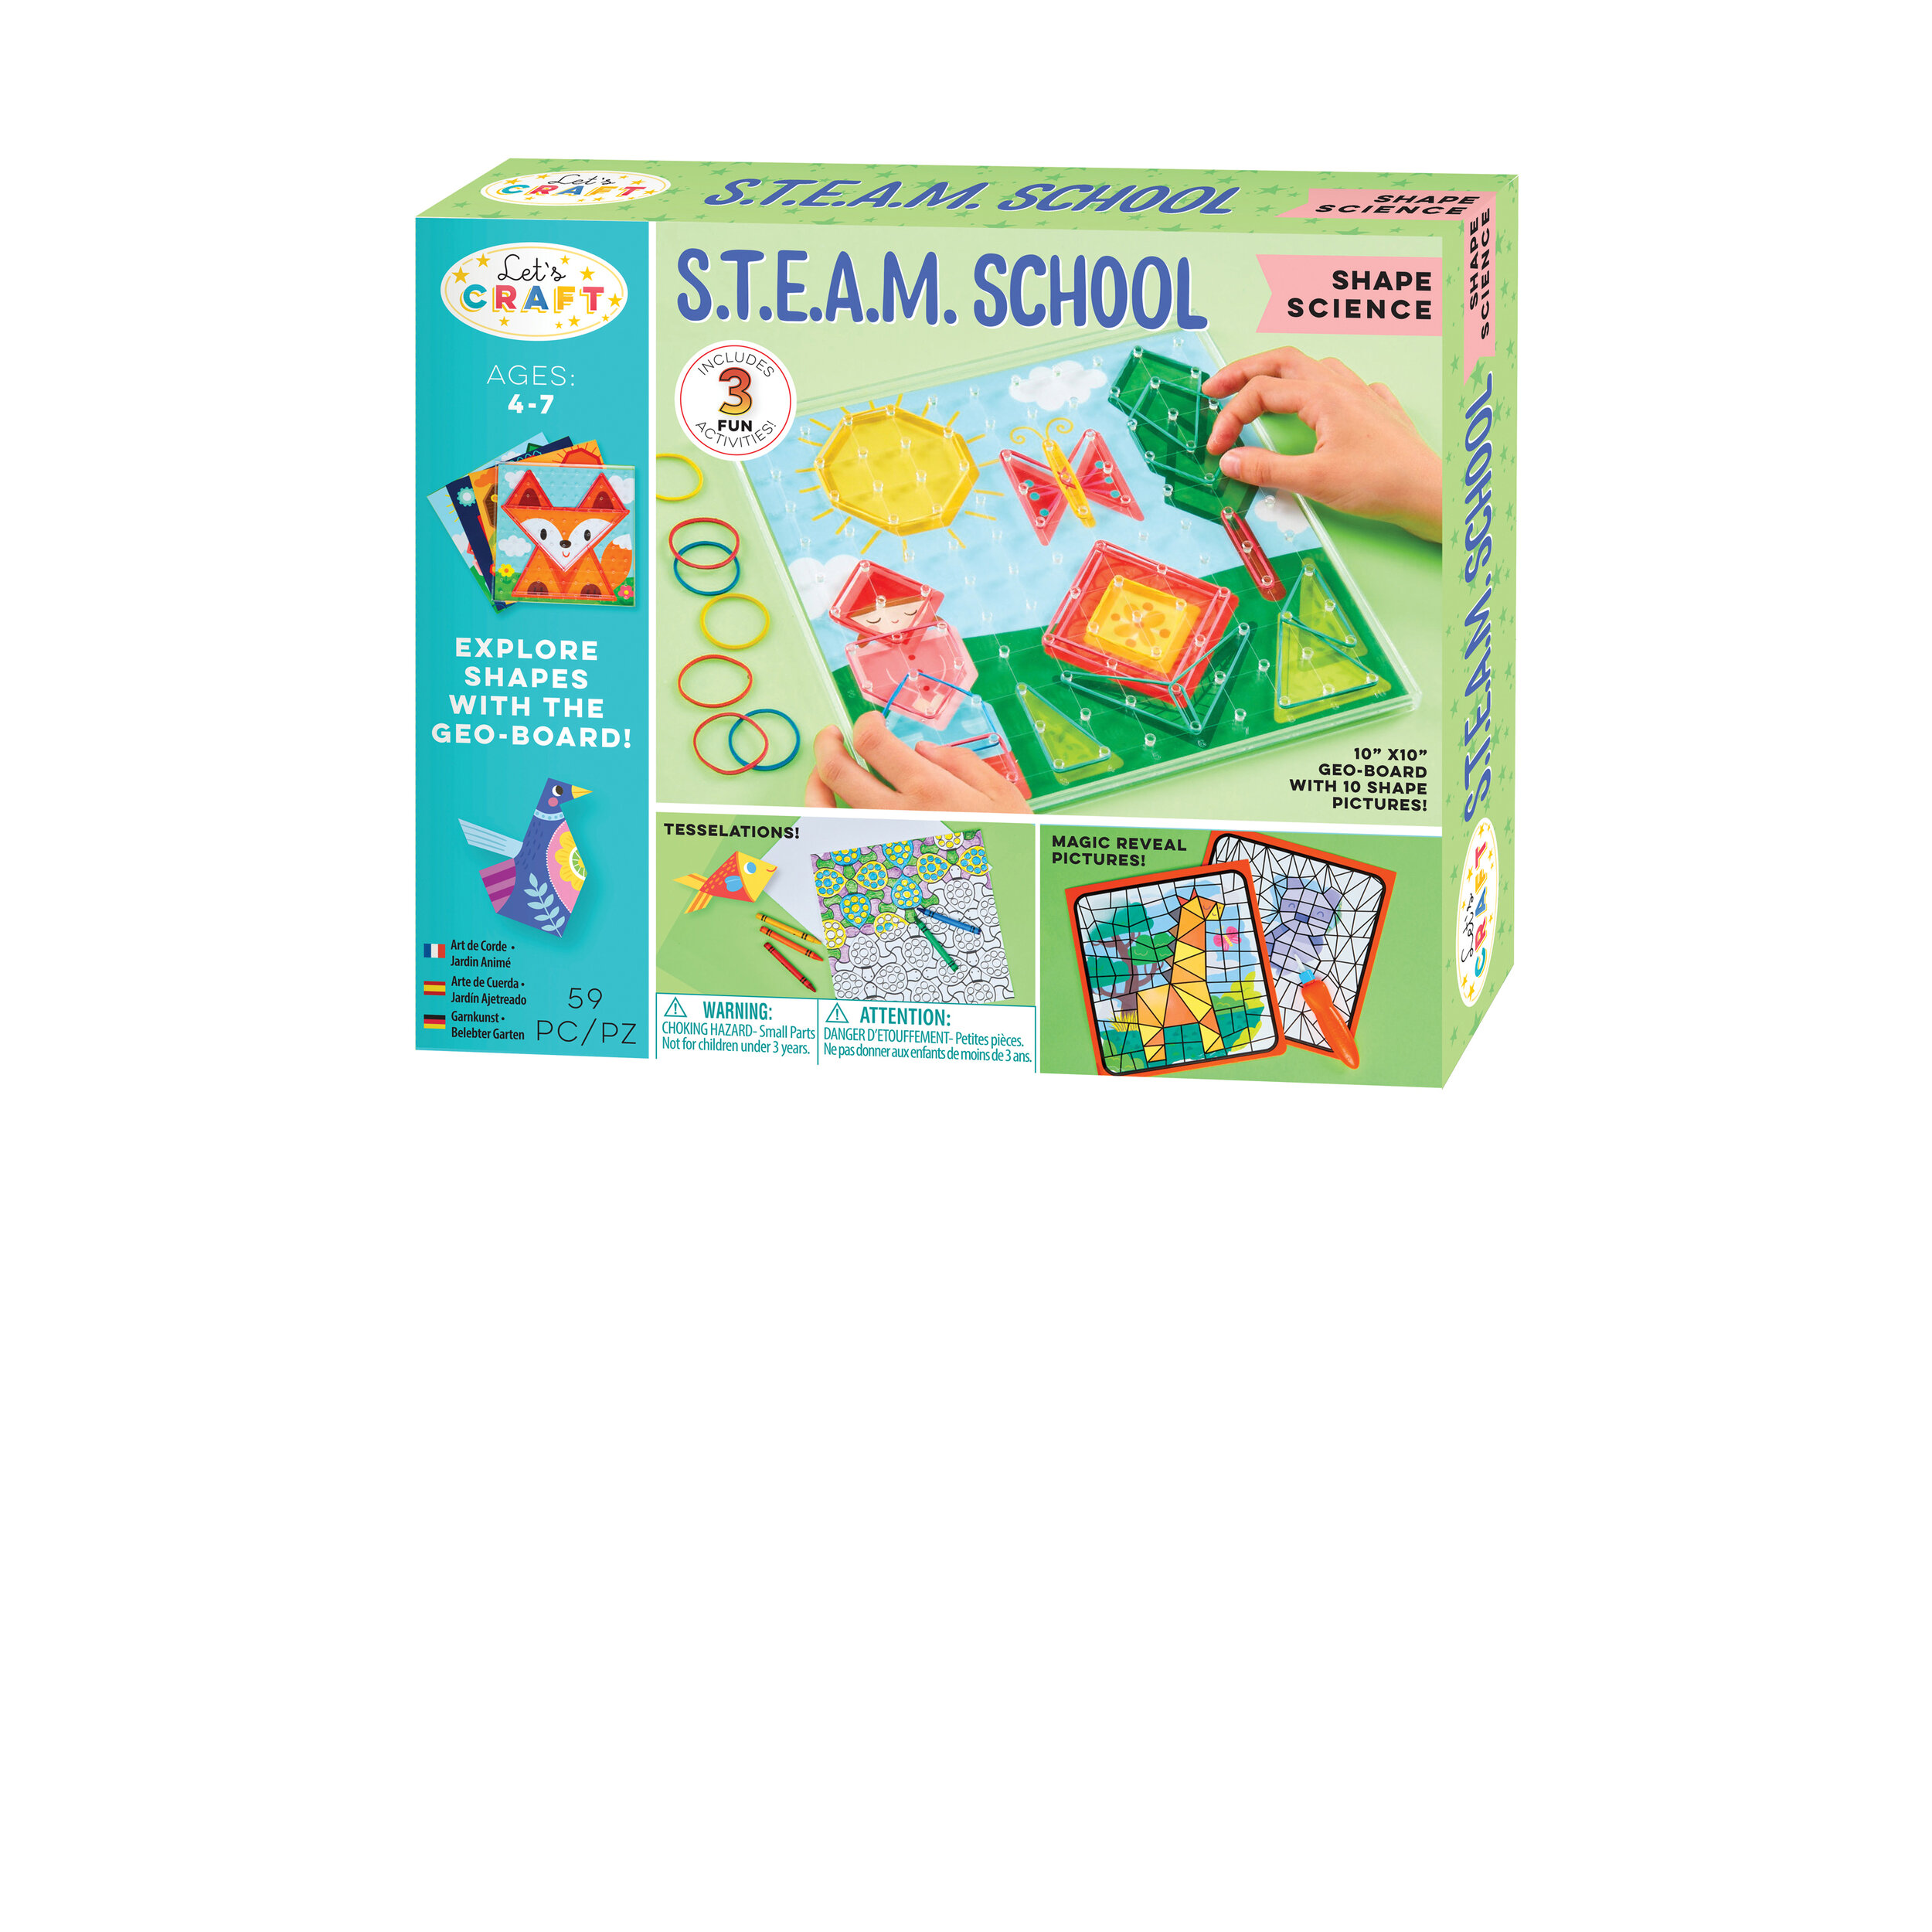 School Studio Science Kit Arts and Crafts with Kids Experiment Kit All in One Bright Stripes Lets Craft S.T.E.A.M STEAM Learning Toy Ages 4 to 7